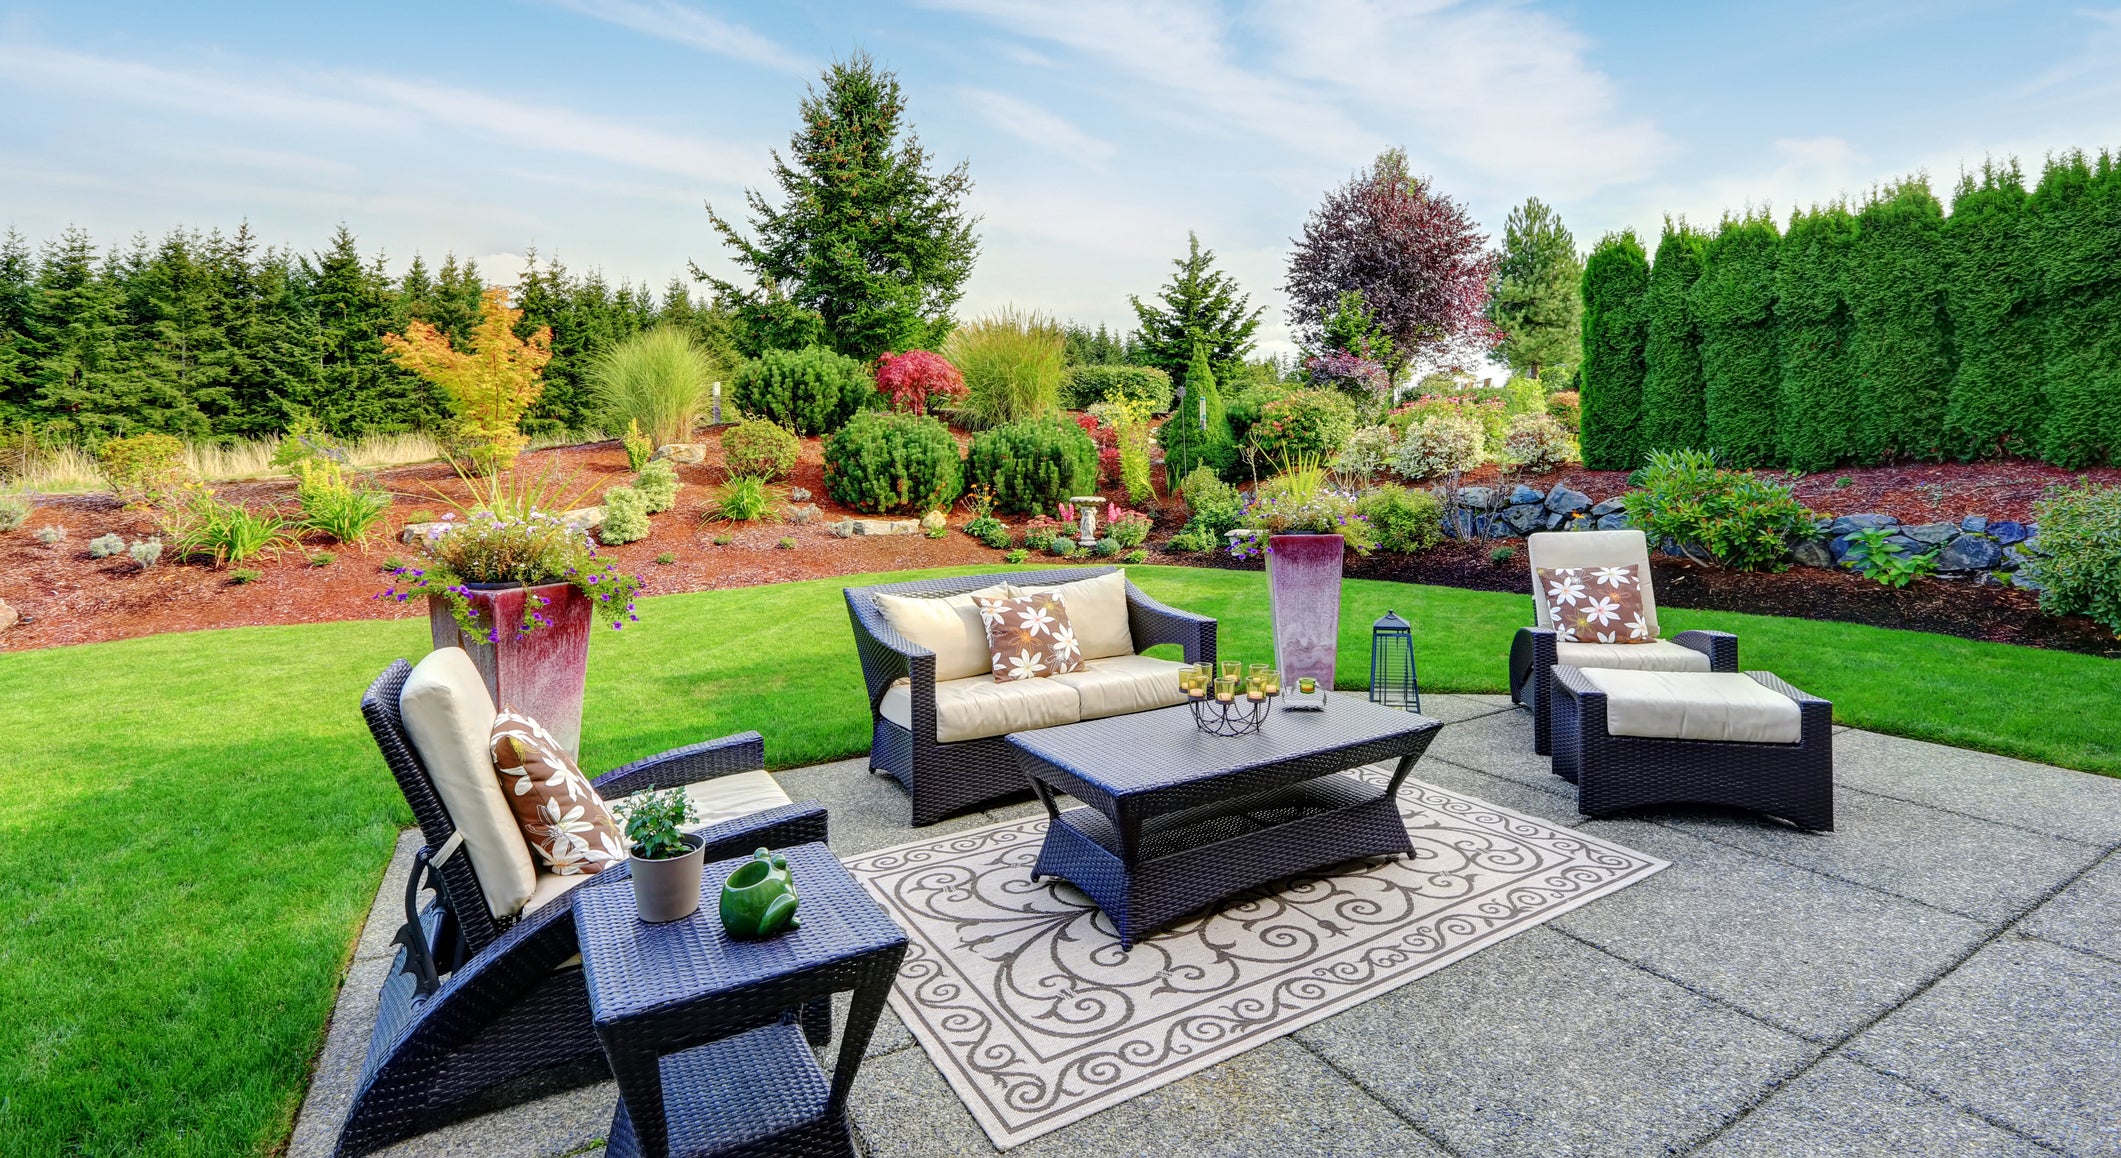 Wayfair Memorial Day sale: The best deals on outdoor furniture, appliances,  grills up to 70% off 